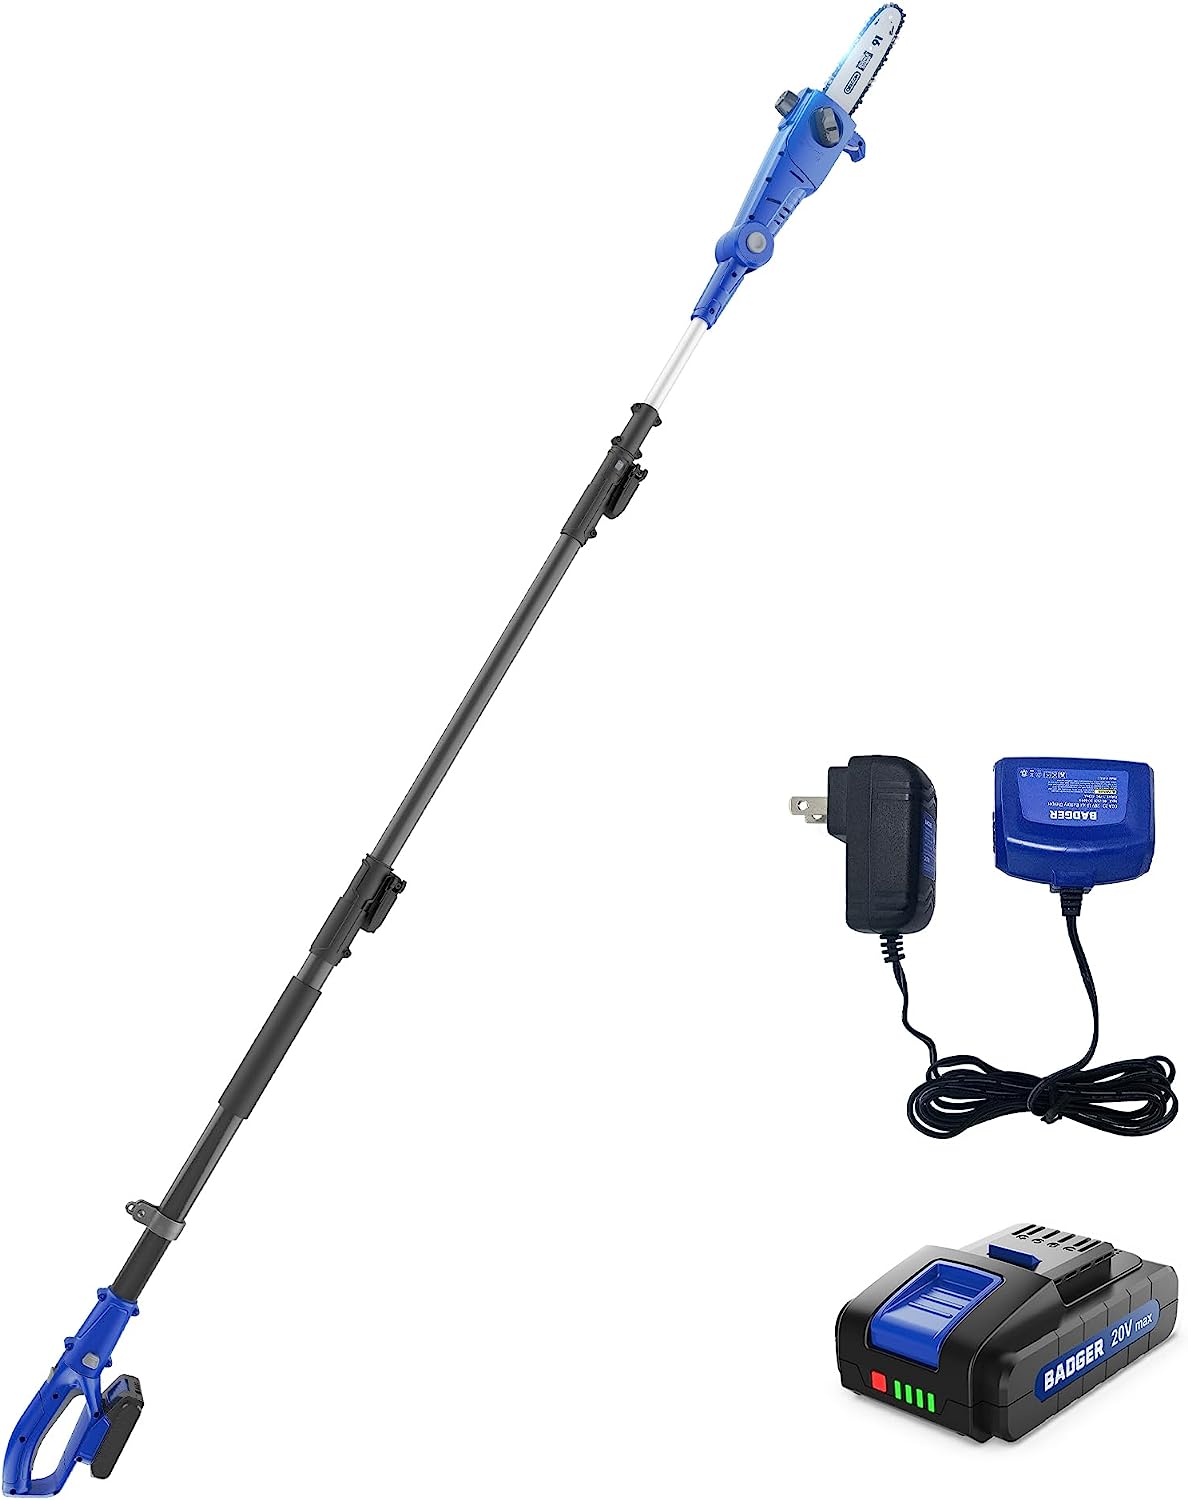 WILD BADGER POWER Cordless Pole Saw 2.0Ah 20V Battery Powered with Telescoping Pole, Adjustable Head & Oregon bar and chain